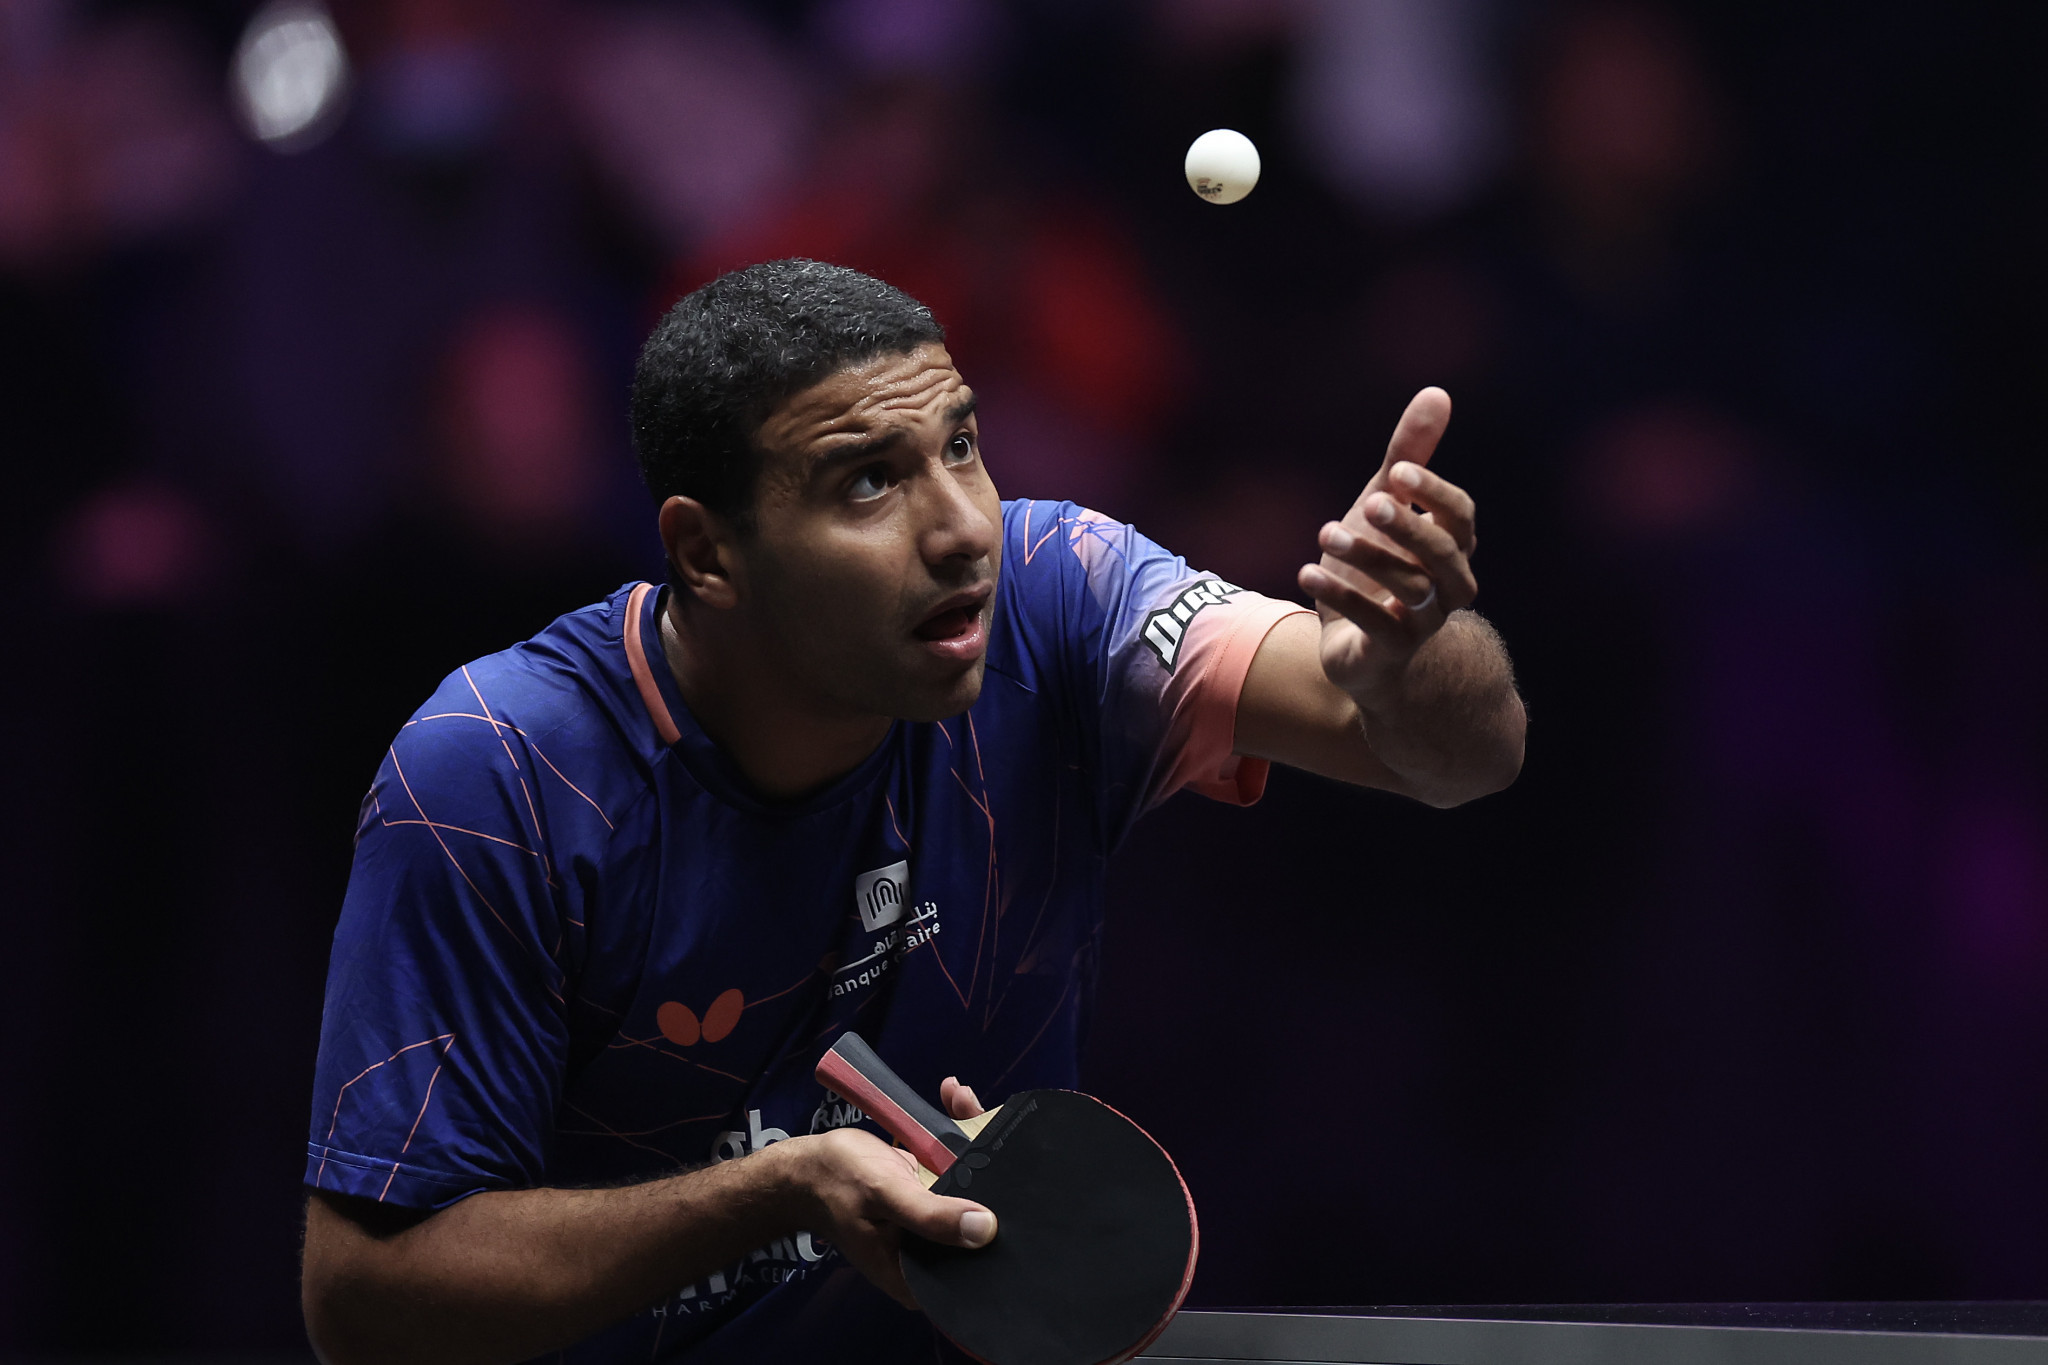  Omar Assar of Egypt became the second man from Africa to reach the quart-finals of the World Table Tennis Championships ©Getty Images